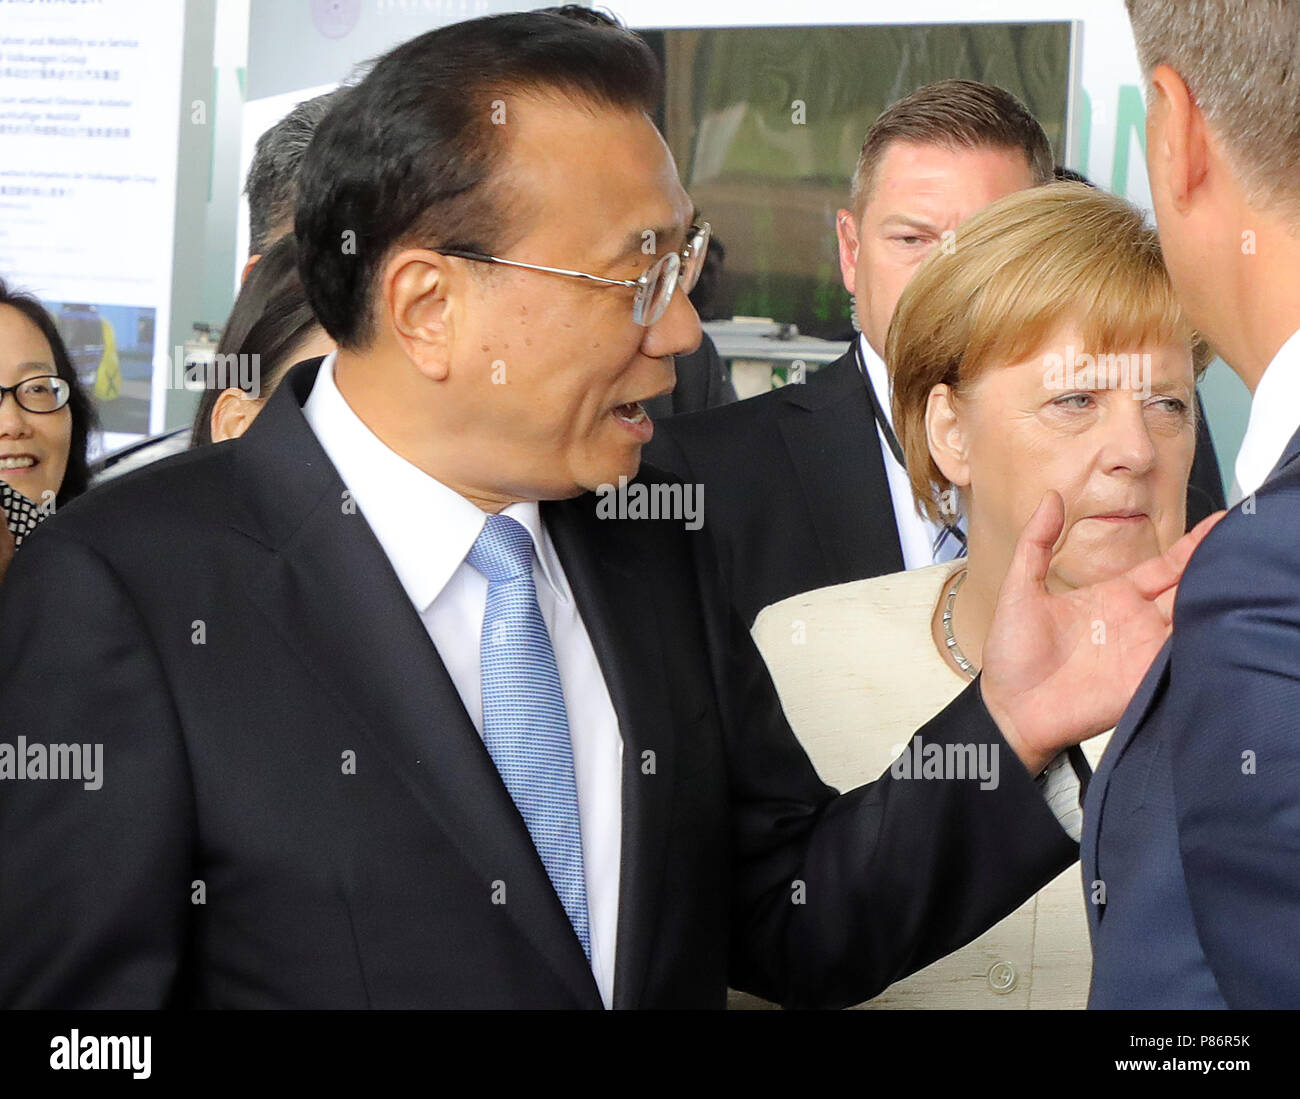 Berlin, Germany. 10th July, 2018. Li Keqiang (L), Premier of the People's Republic of China, and German Chancellor Angela Merkel of the Christian Democratic Union (CDU) attend a presentation about autonomous driving on the former Tempelhof Airport in the course of the 5th German-Chinese government consultations. Credit: Wolfgang Kumm/dpa/Alamy Live News Stock Photo